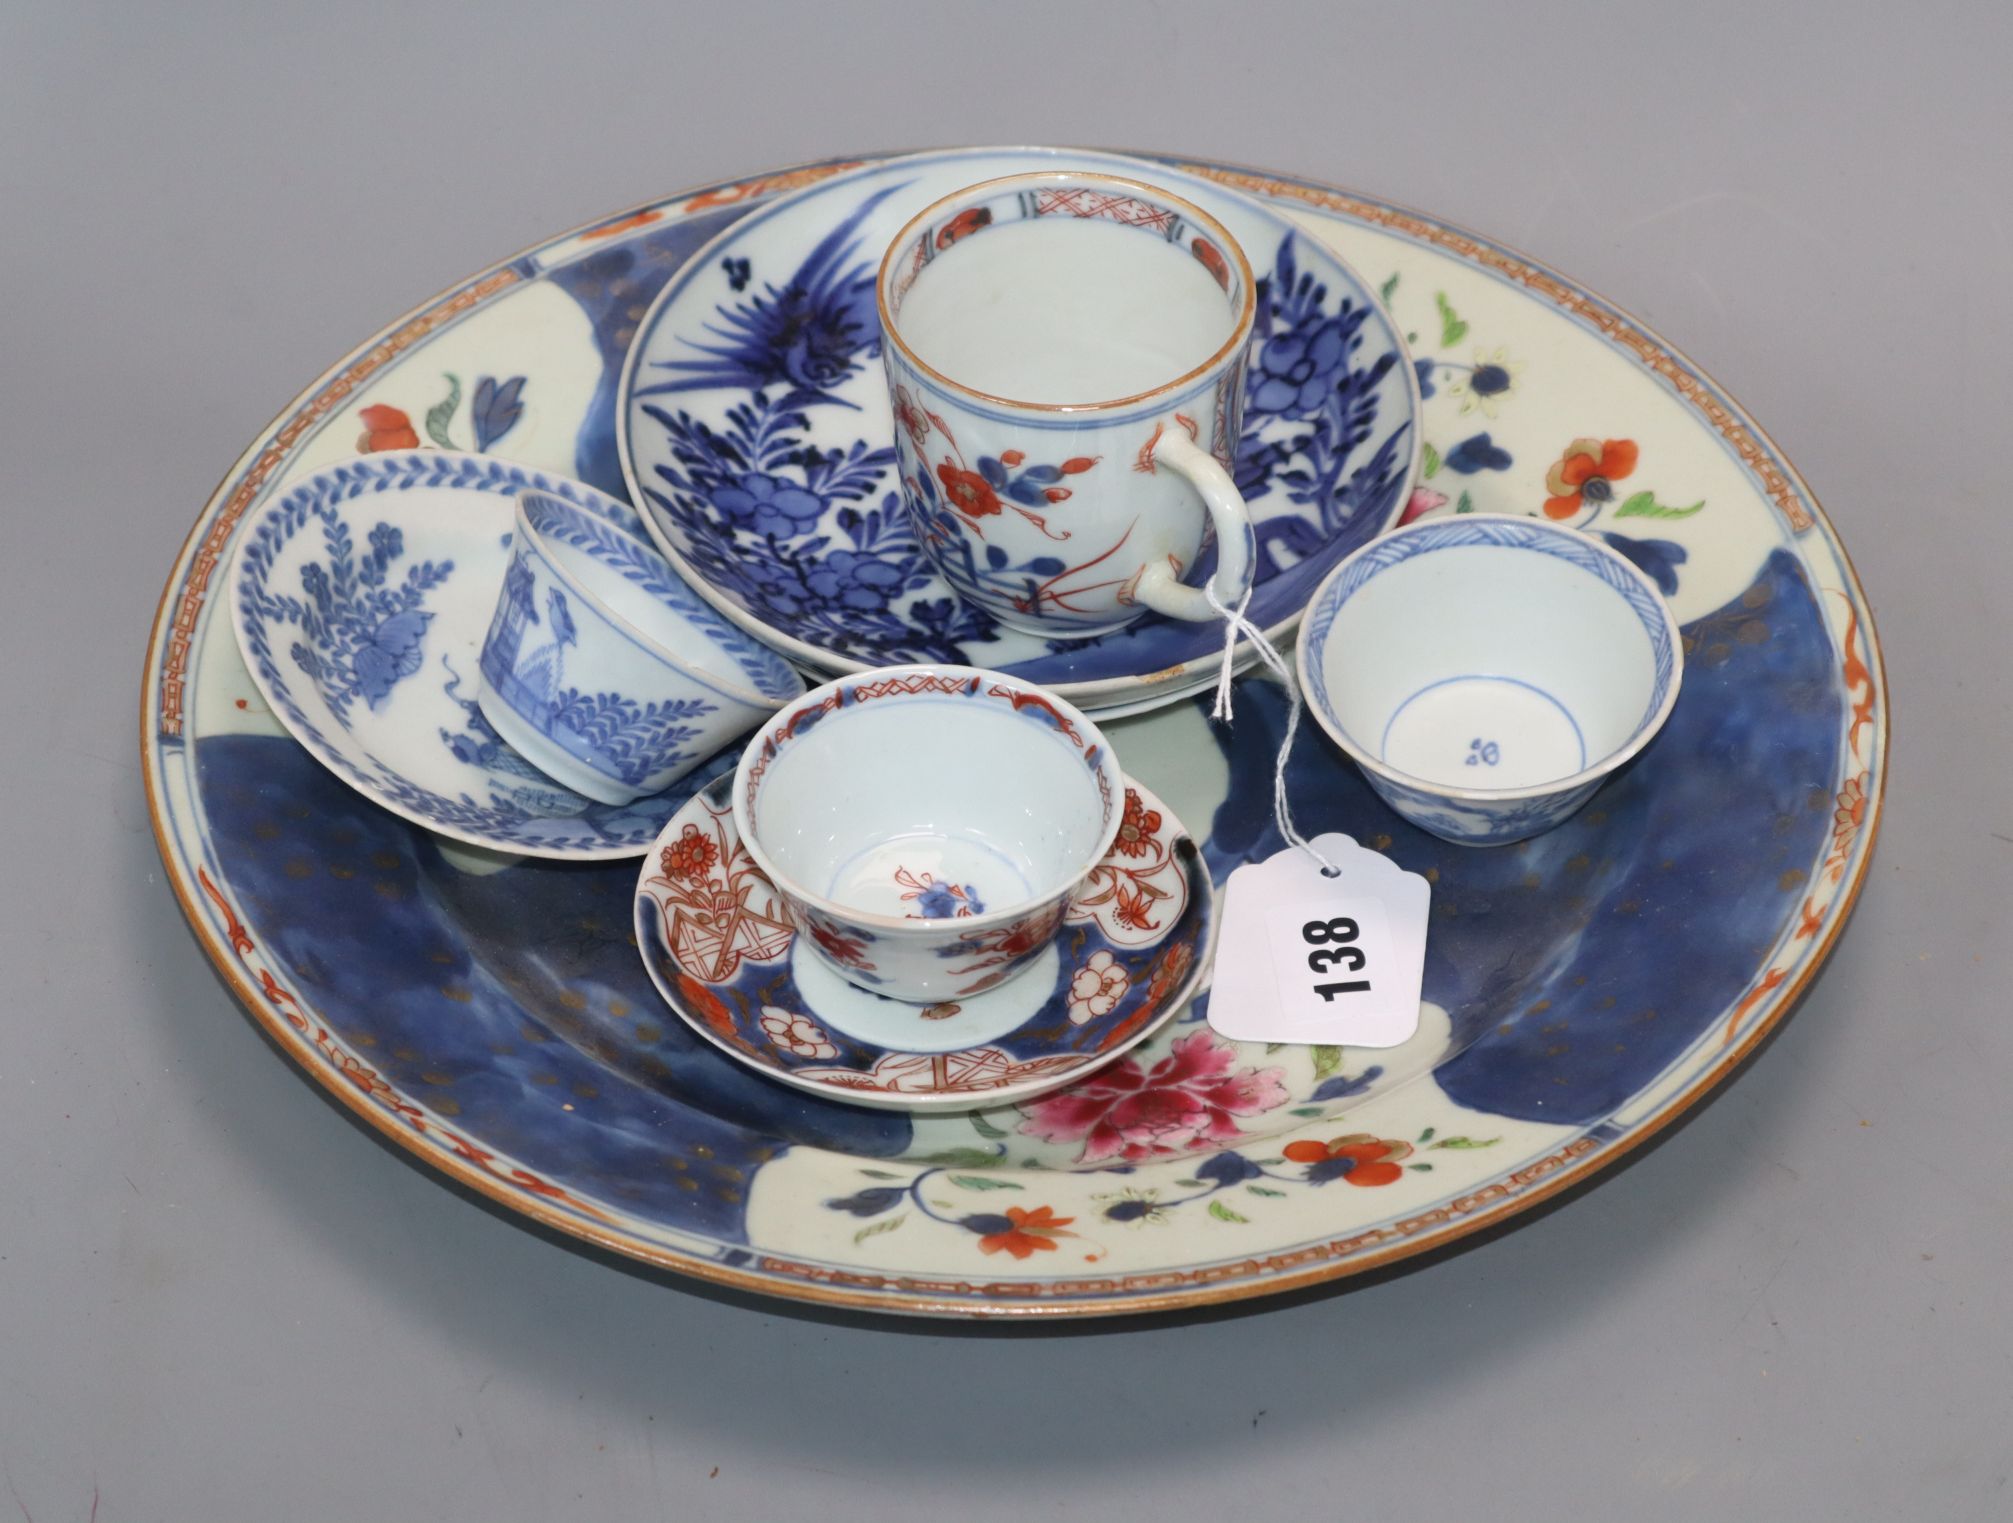 A group of 18th century Chinese export dishes, cup and tea bowls